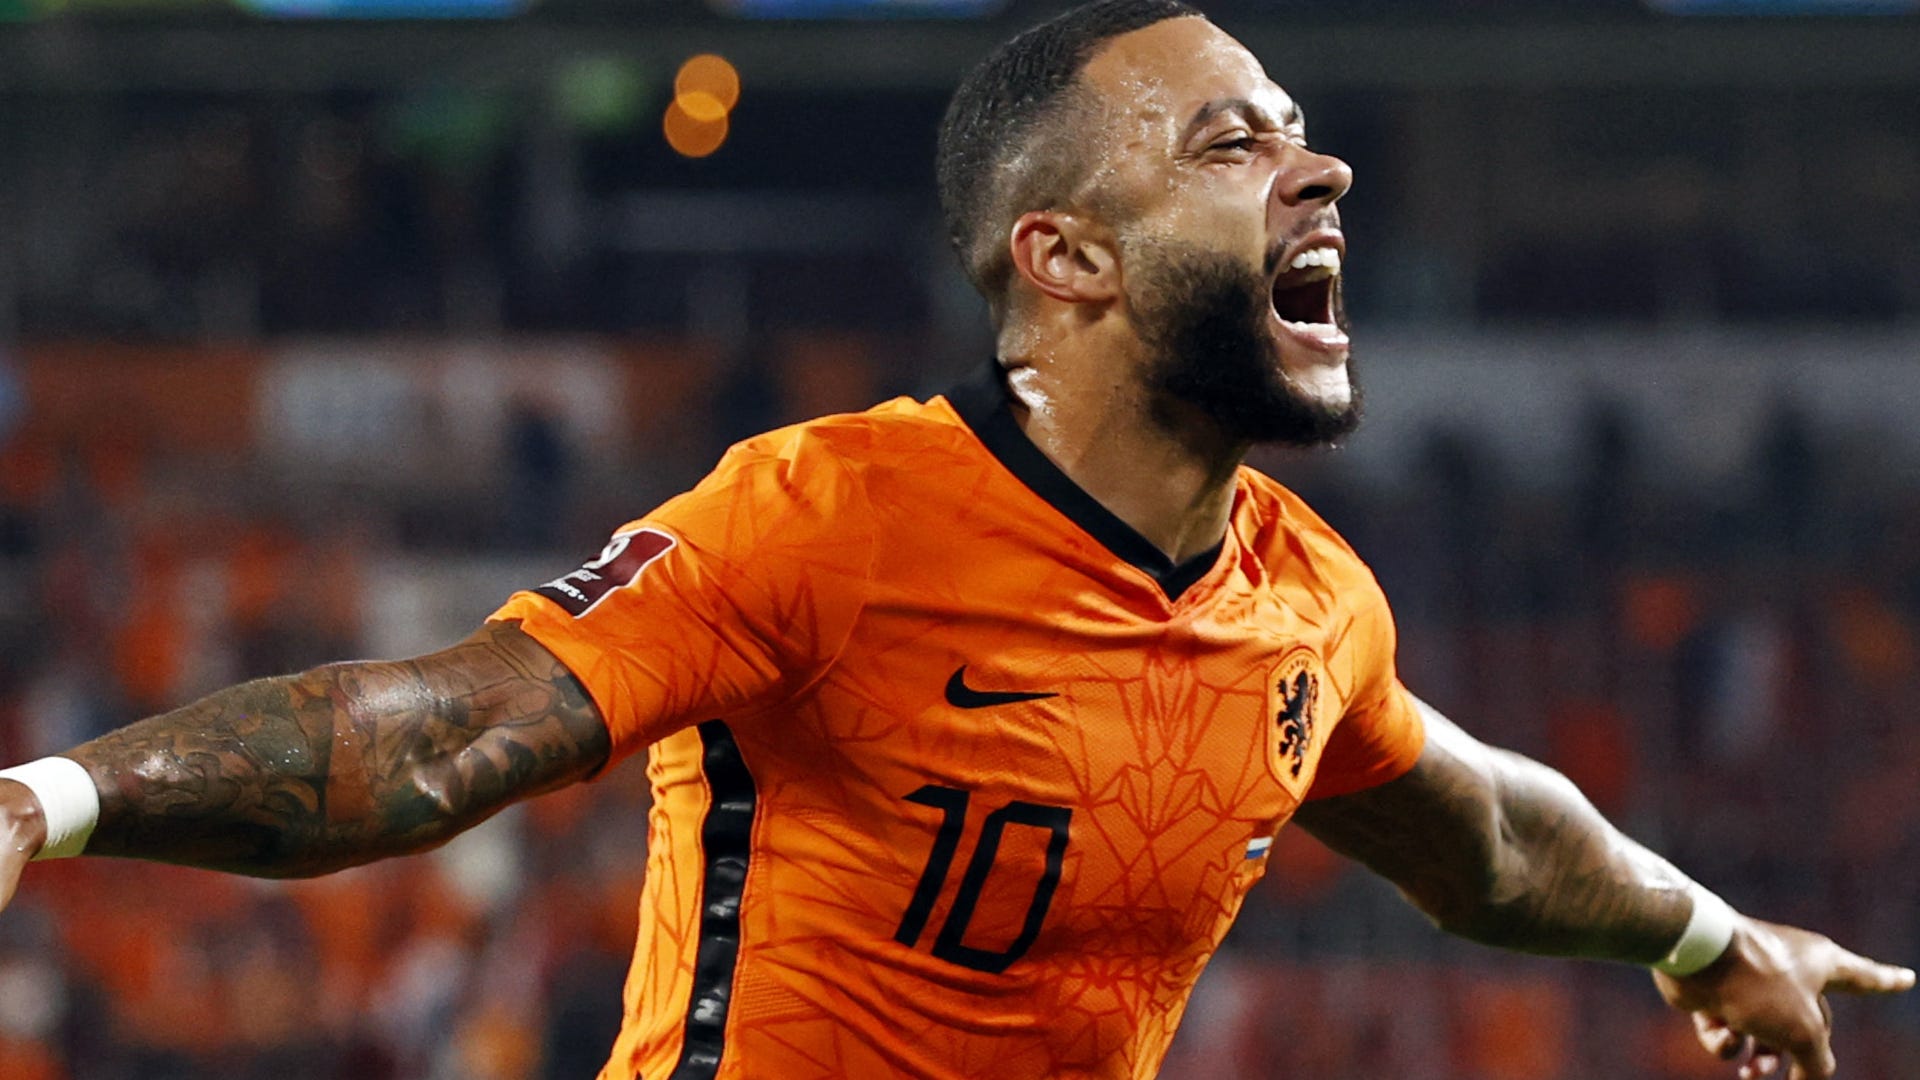 GOAL - Happy 26th birthday to Lyon and Netherlands star Memphis